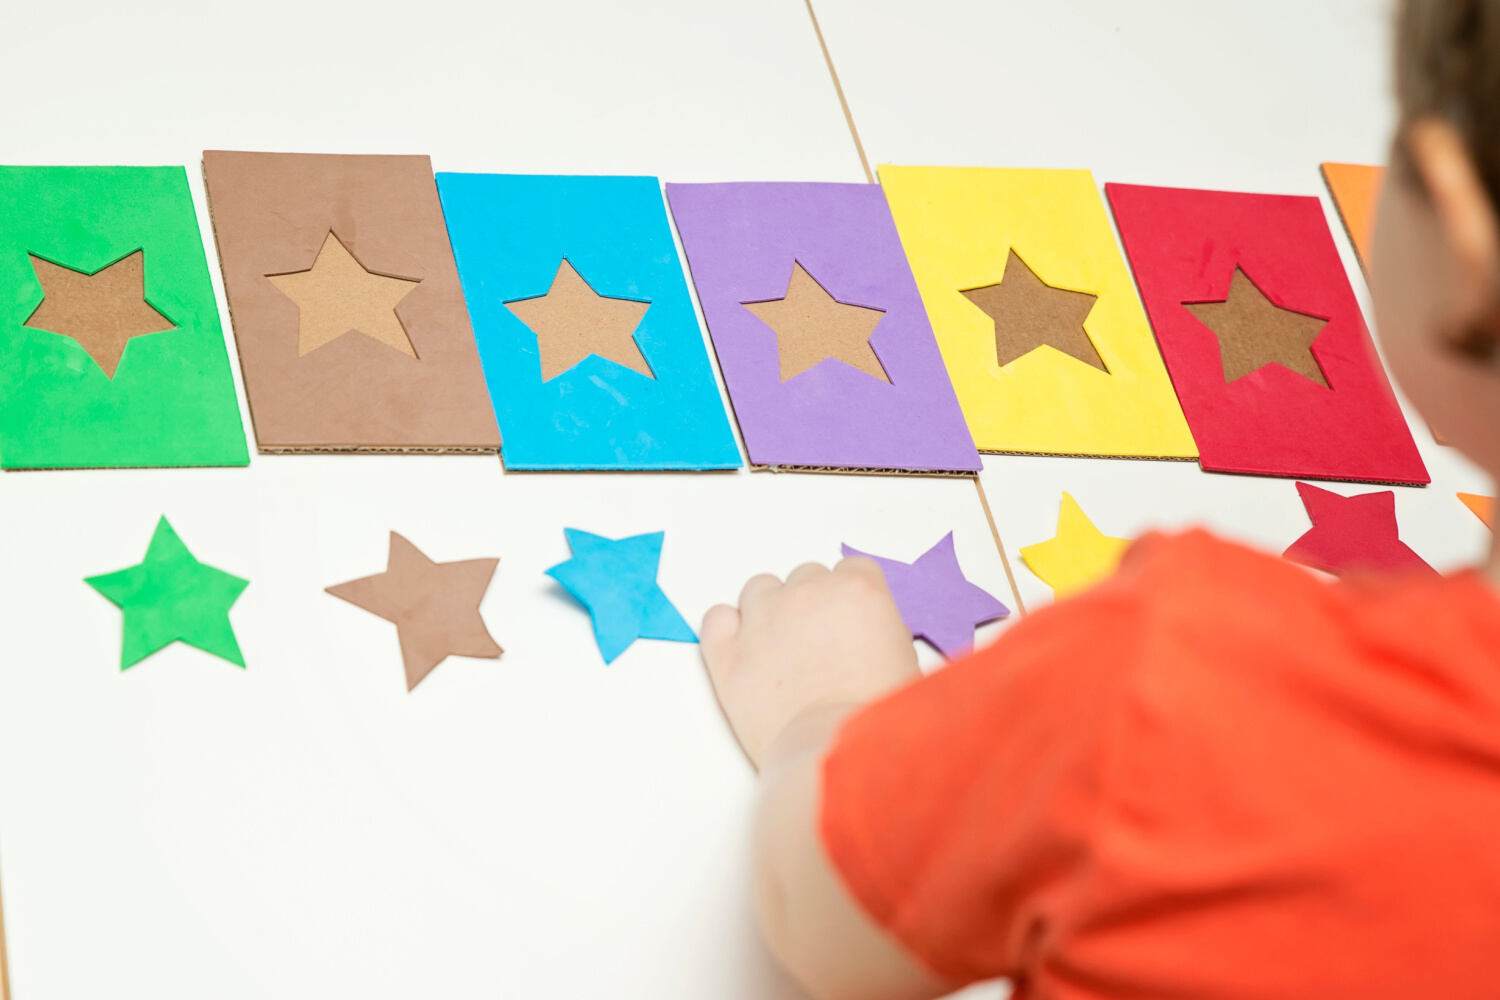 Sorting activity can help toddlers recognize, match, and sort items into groups